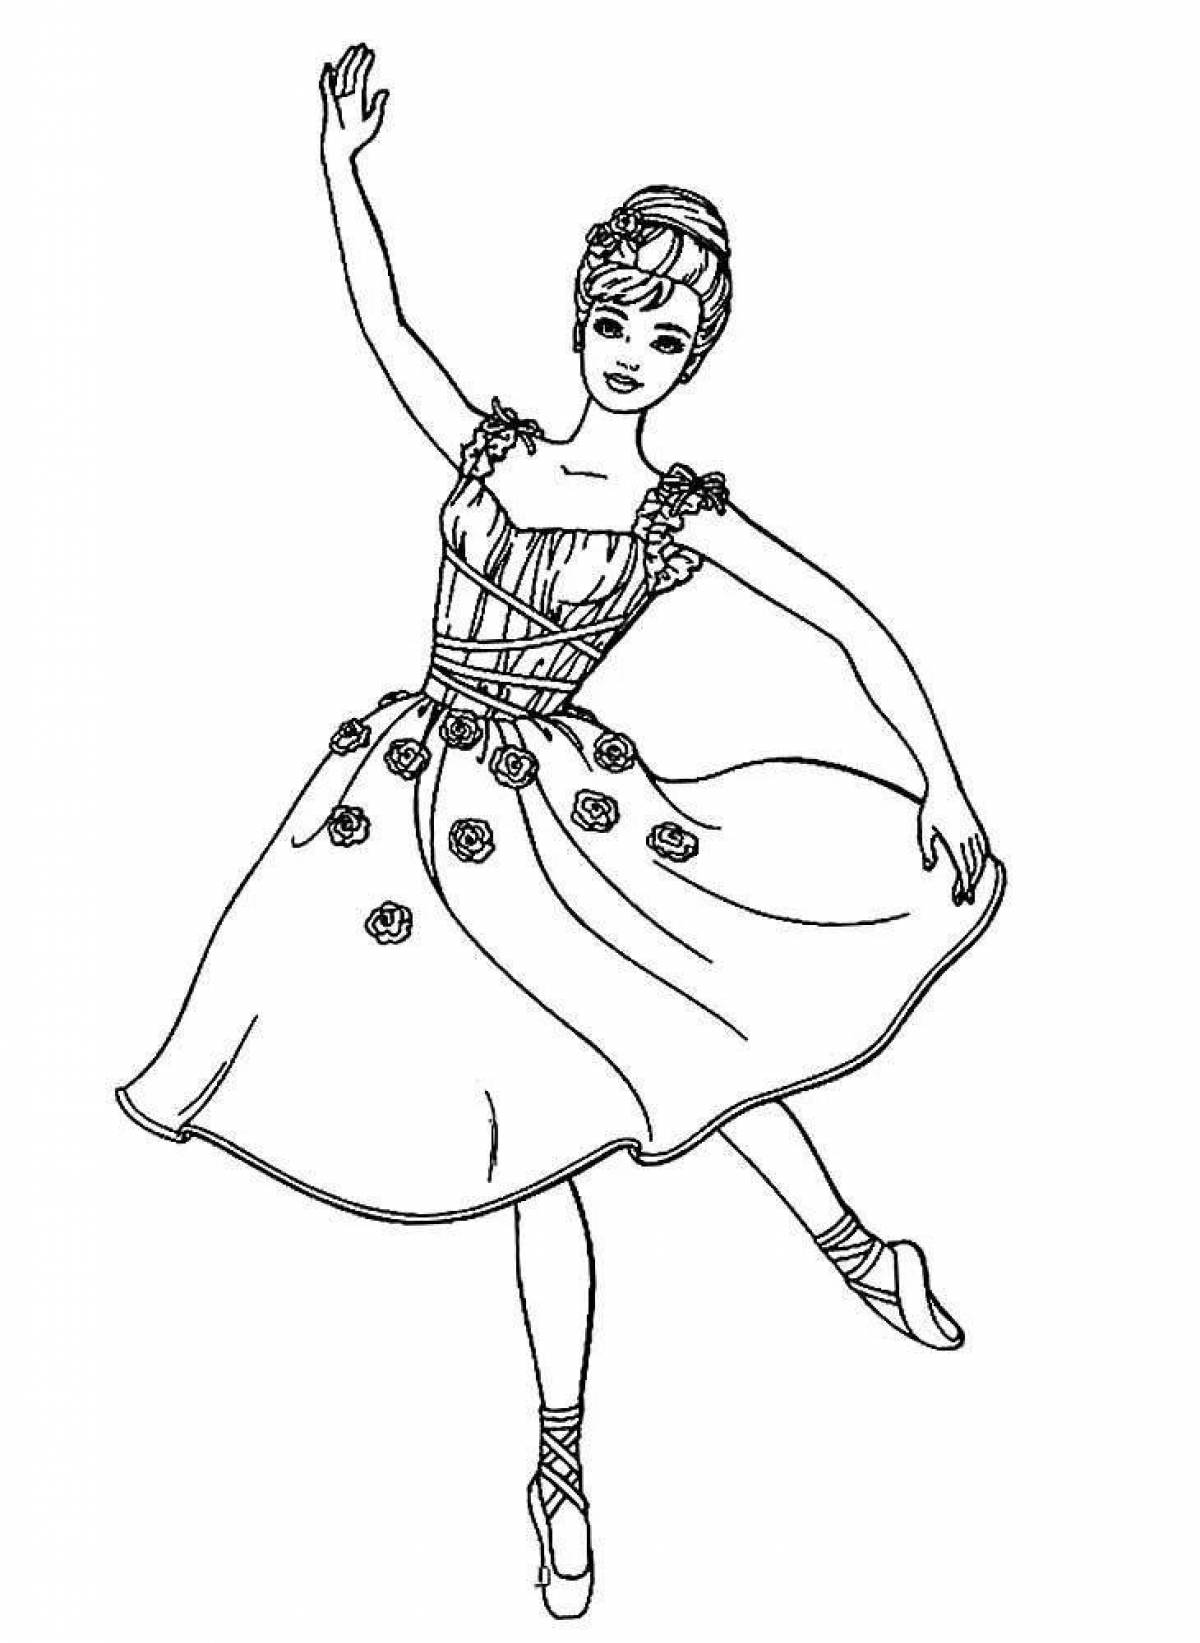 Coloring page charming barbie ballerina